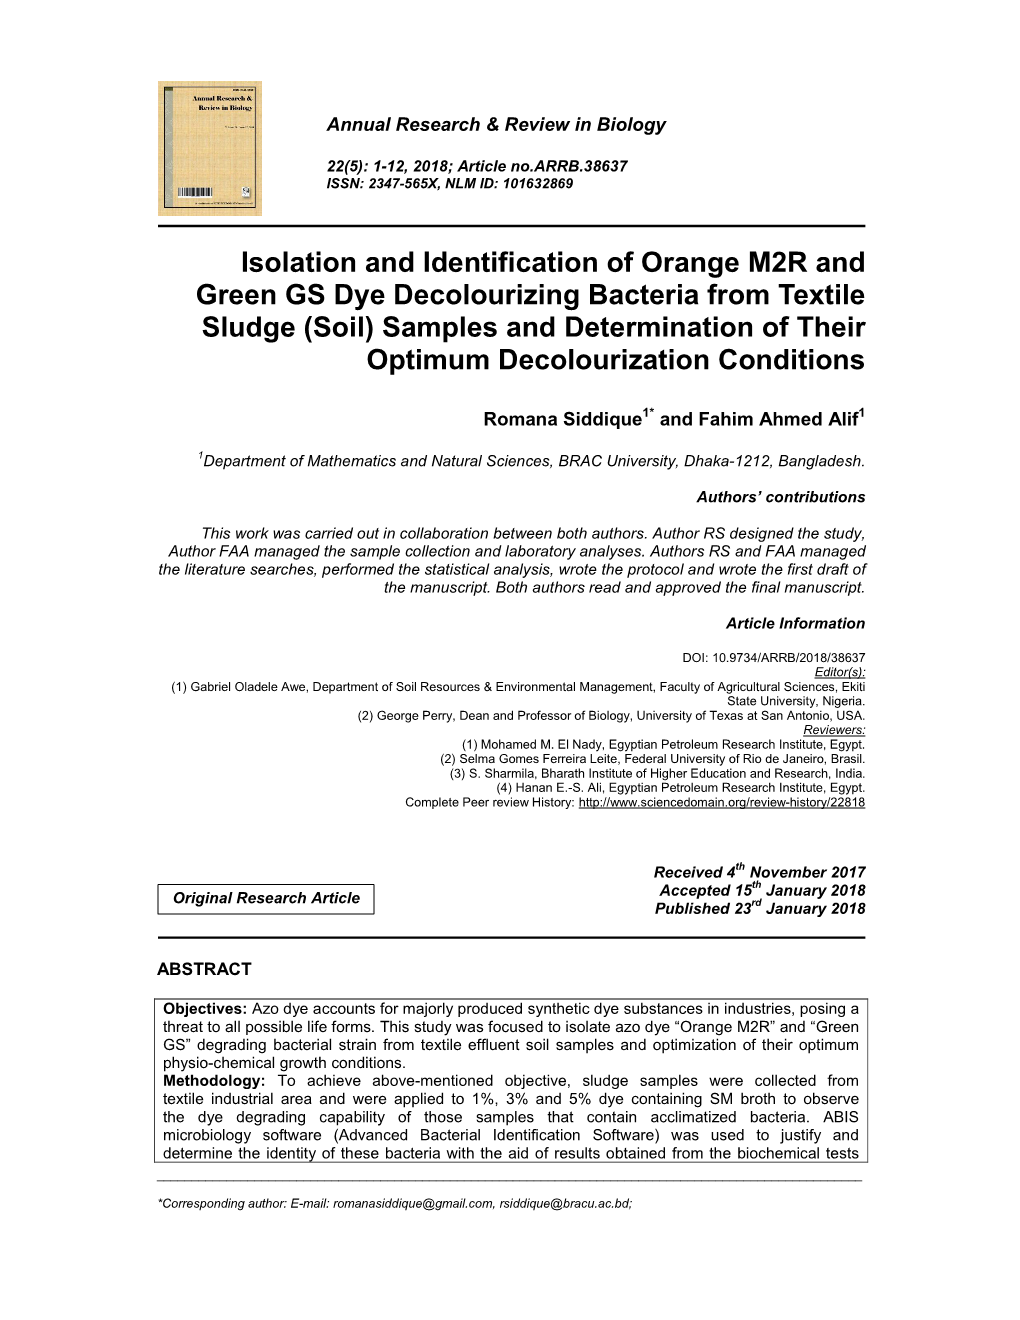 Isolation and Identification of Orange M2R and Green GS Dye